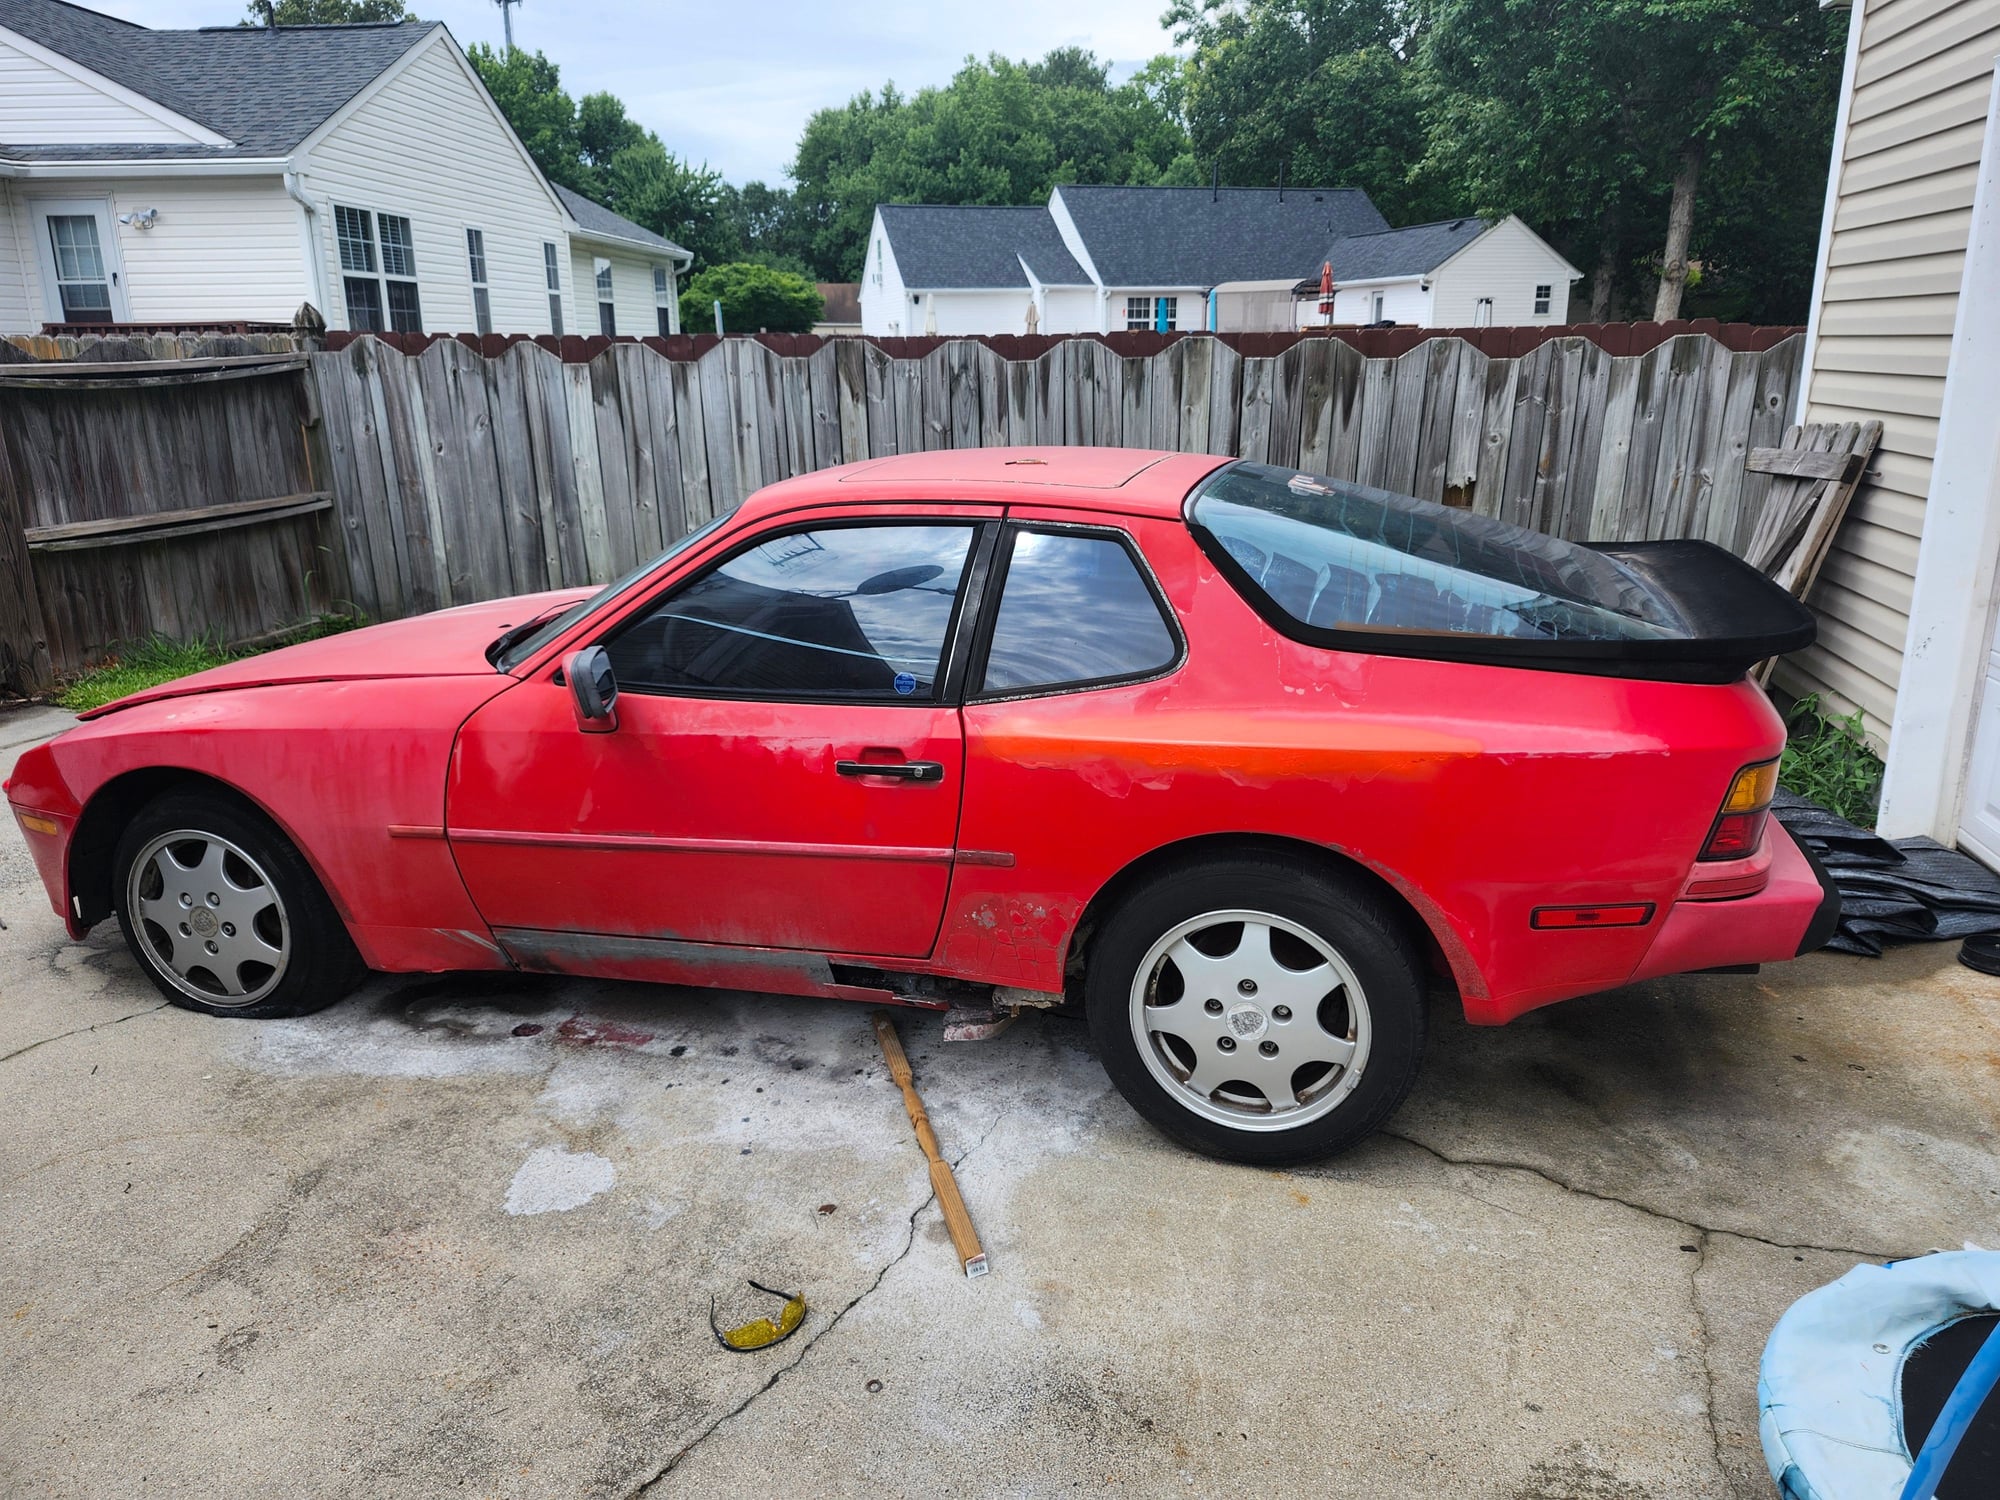 1988 Porsche 944 - 1988 944 NA - Used - VIN WP0AB0949JN47139 - 83,000 Miles - 4 cyl - 2WD - Manual - Coupe - Red - Chesapeake, VA 23322, United States